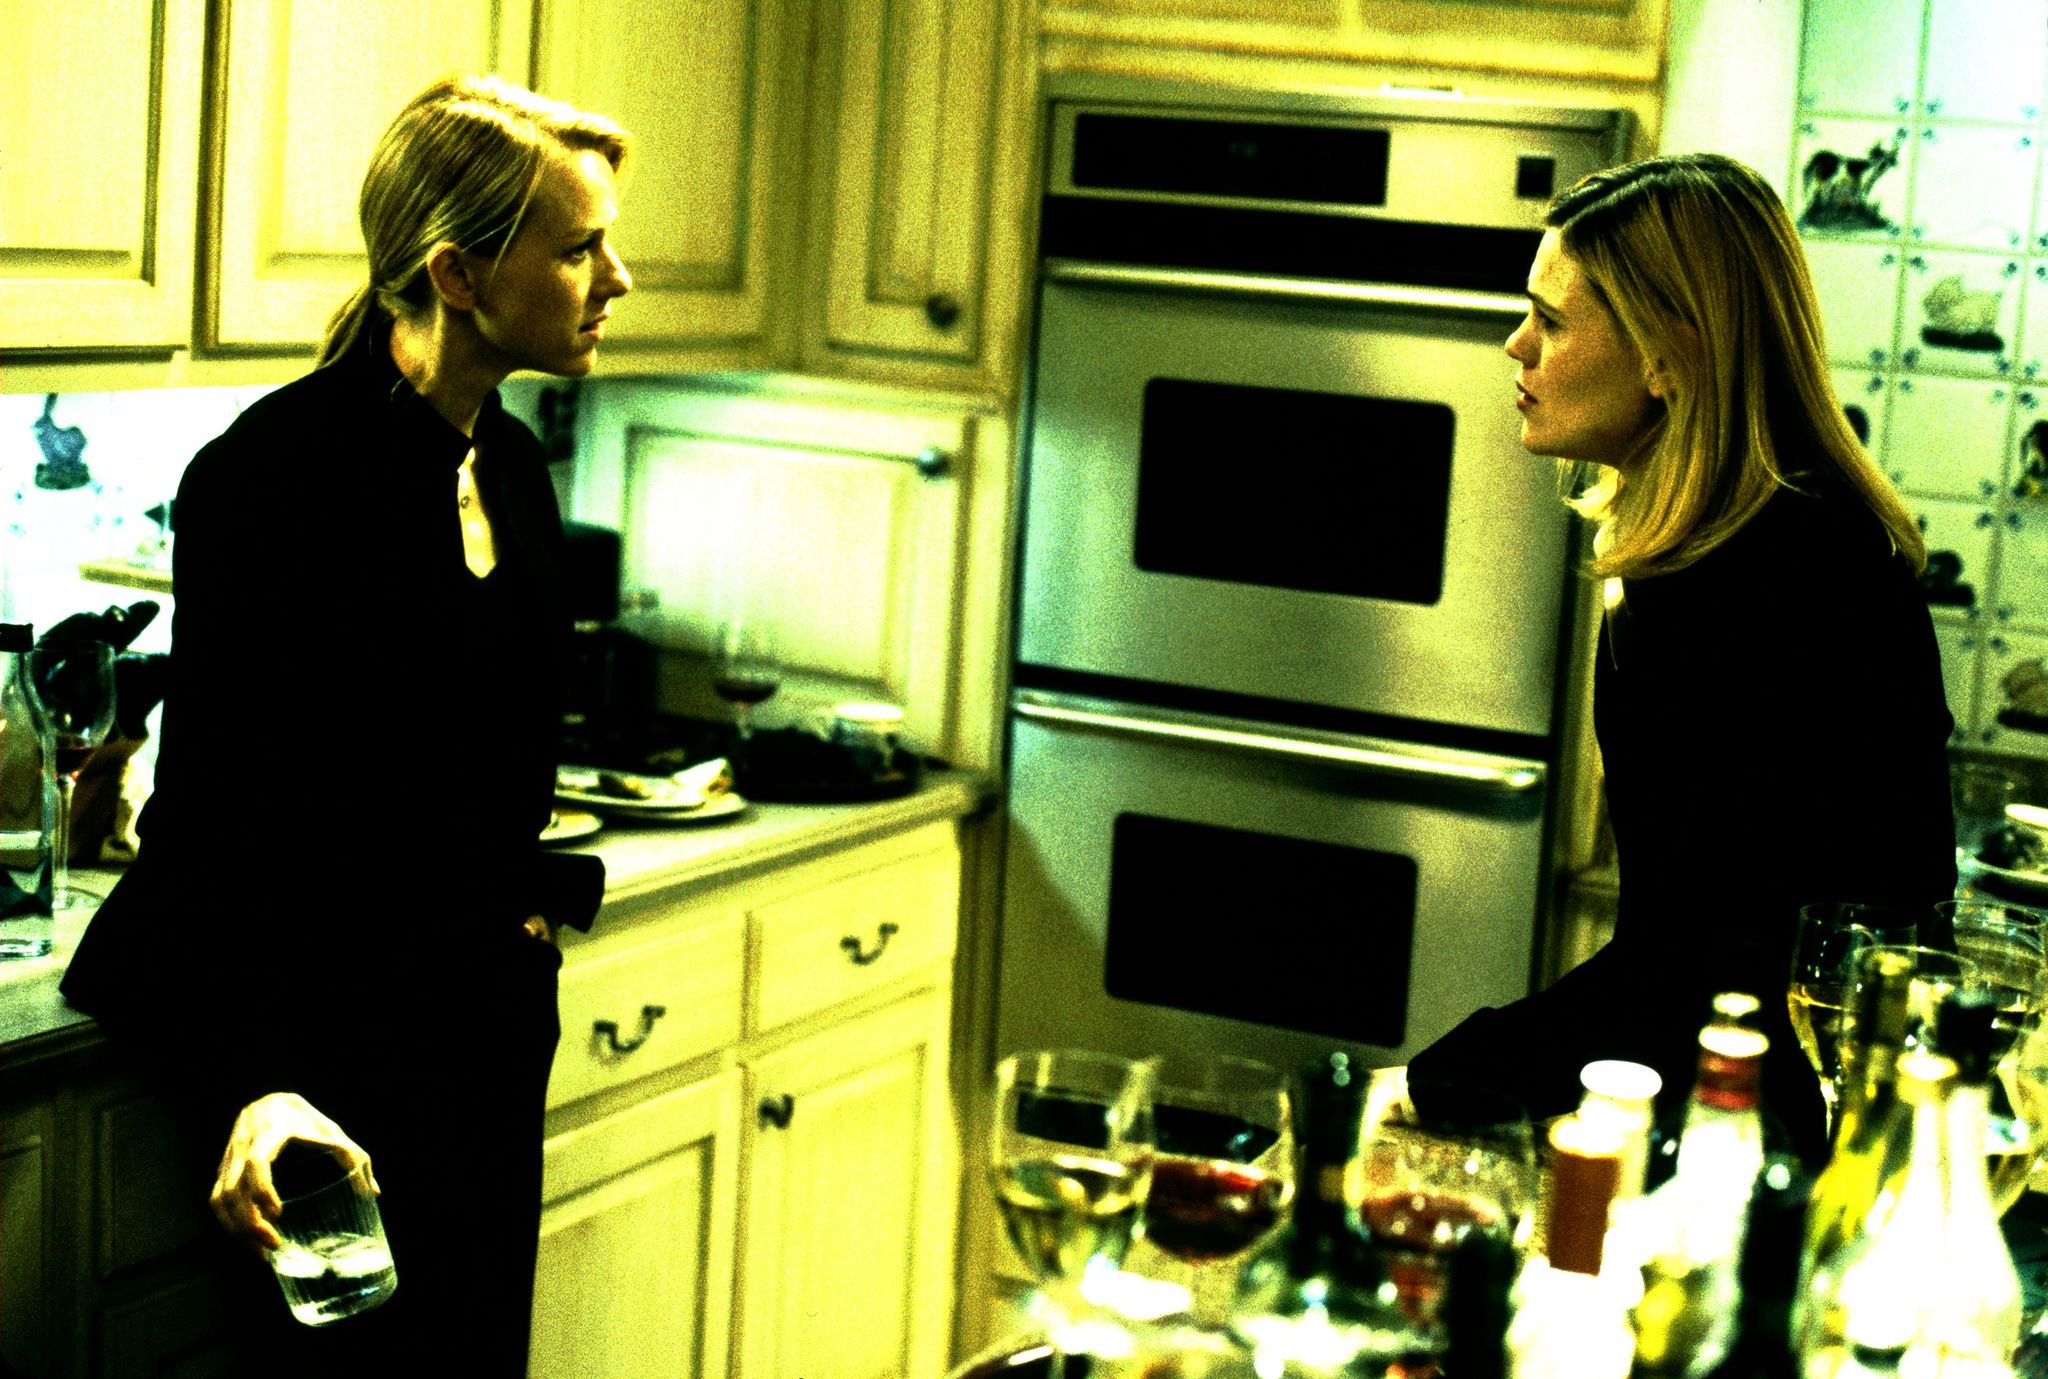 Still of Clea DuVall and Naomi Watts in 21 gramas (2003)